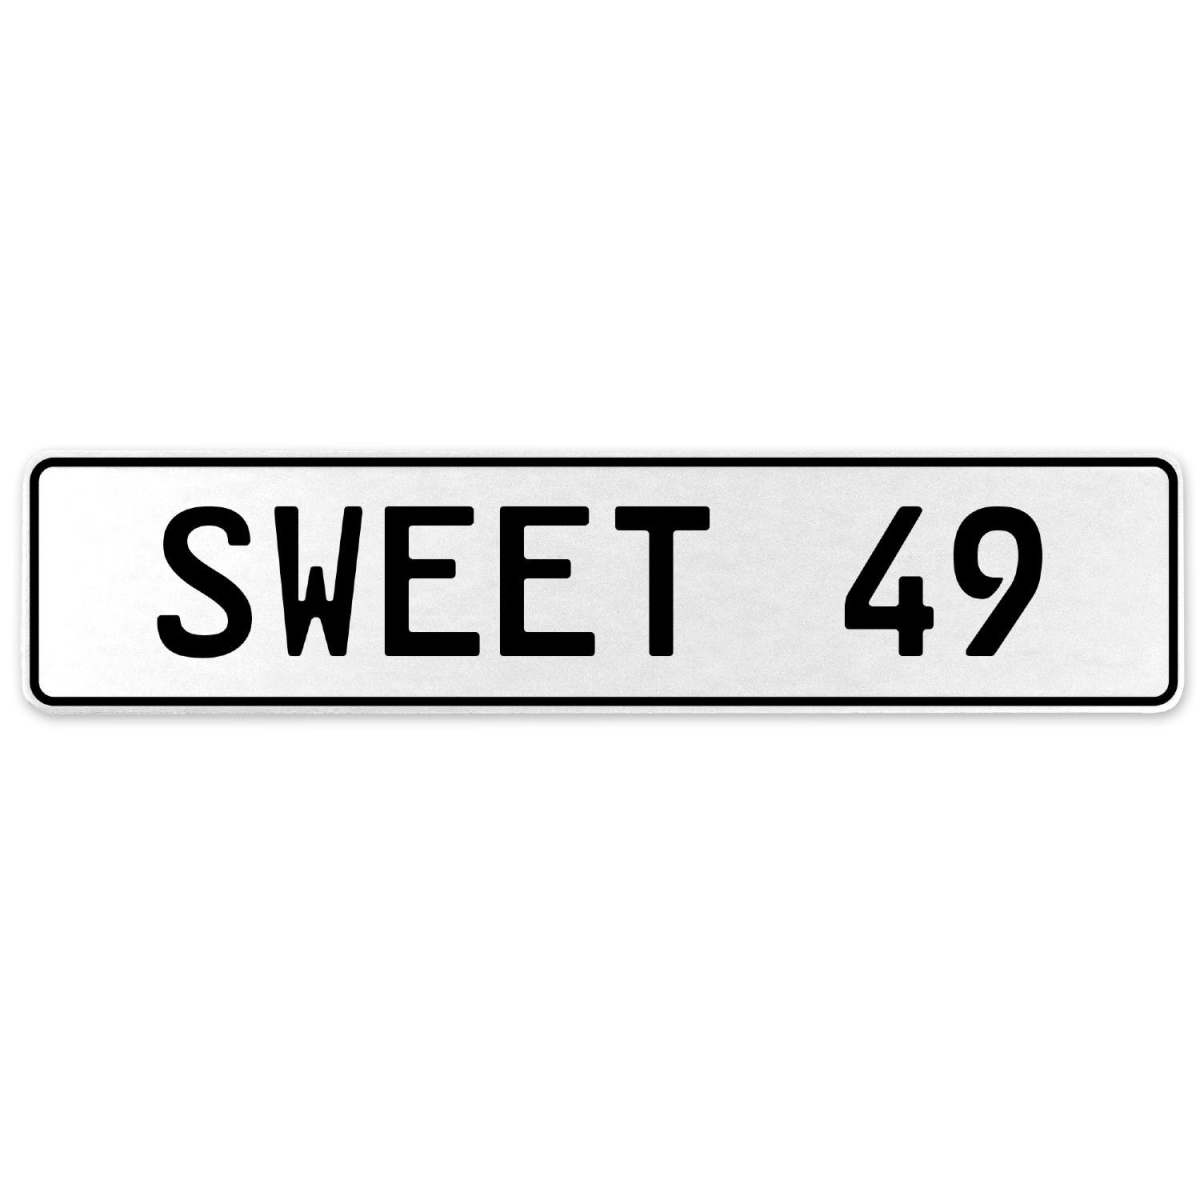 554151 Sweet 49 - White Aluminum Street Sign Mancave Euro Plate Name Door Sign Wall